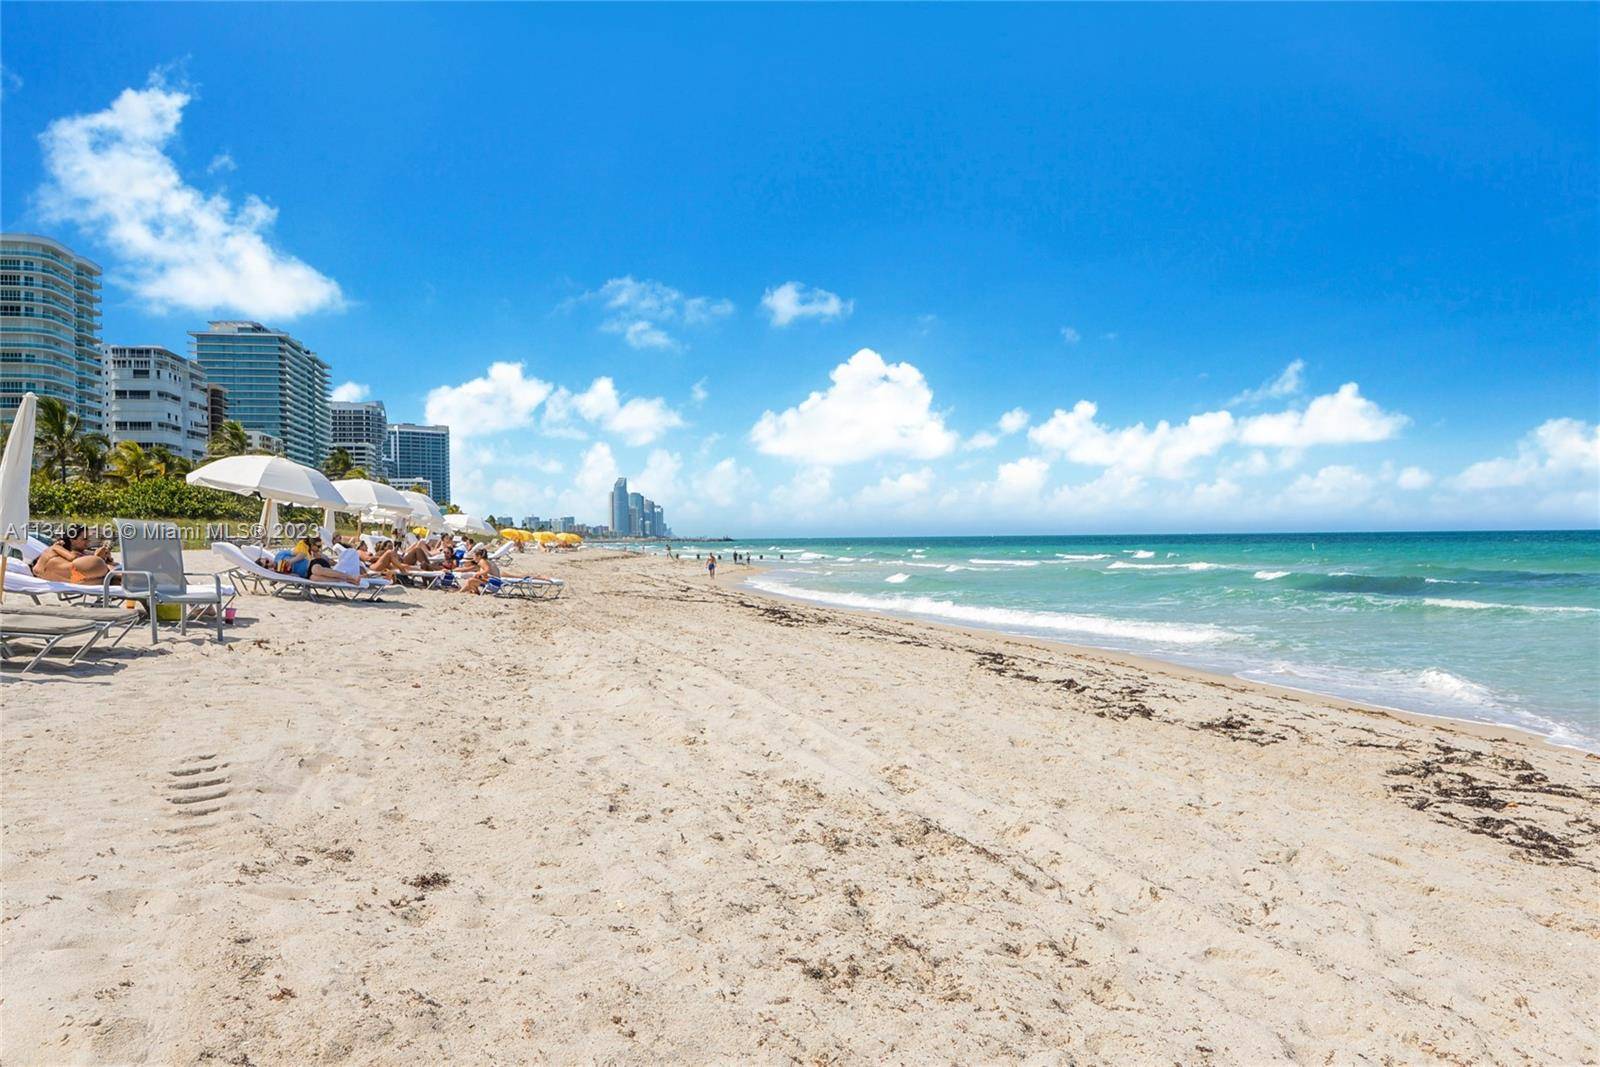 Balmoral Condo unit 3Z renting now, located at The Bal Harbour beach, Florida on the ocean.